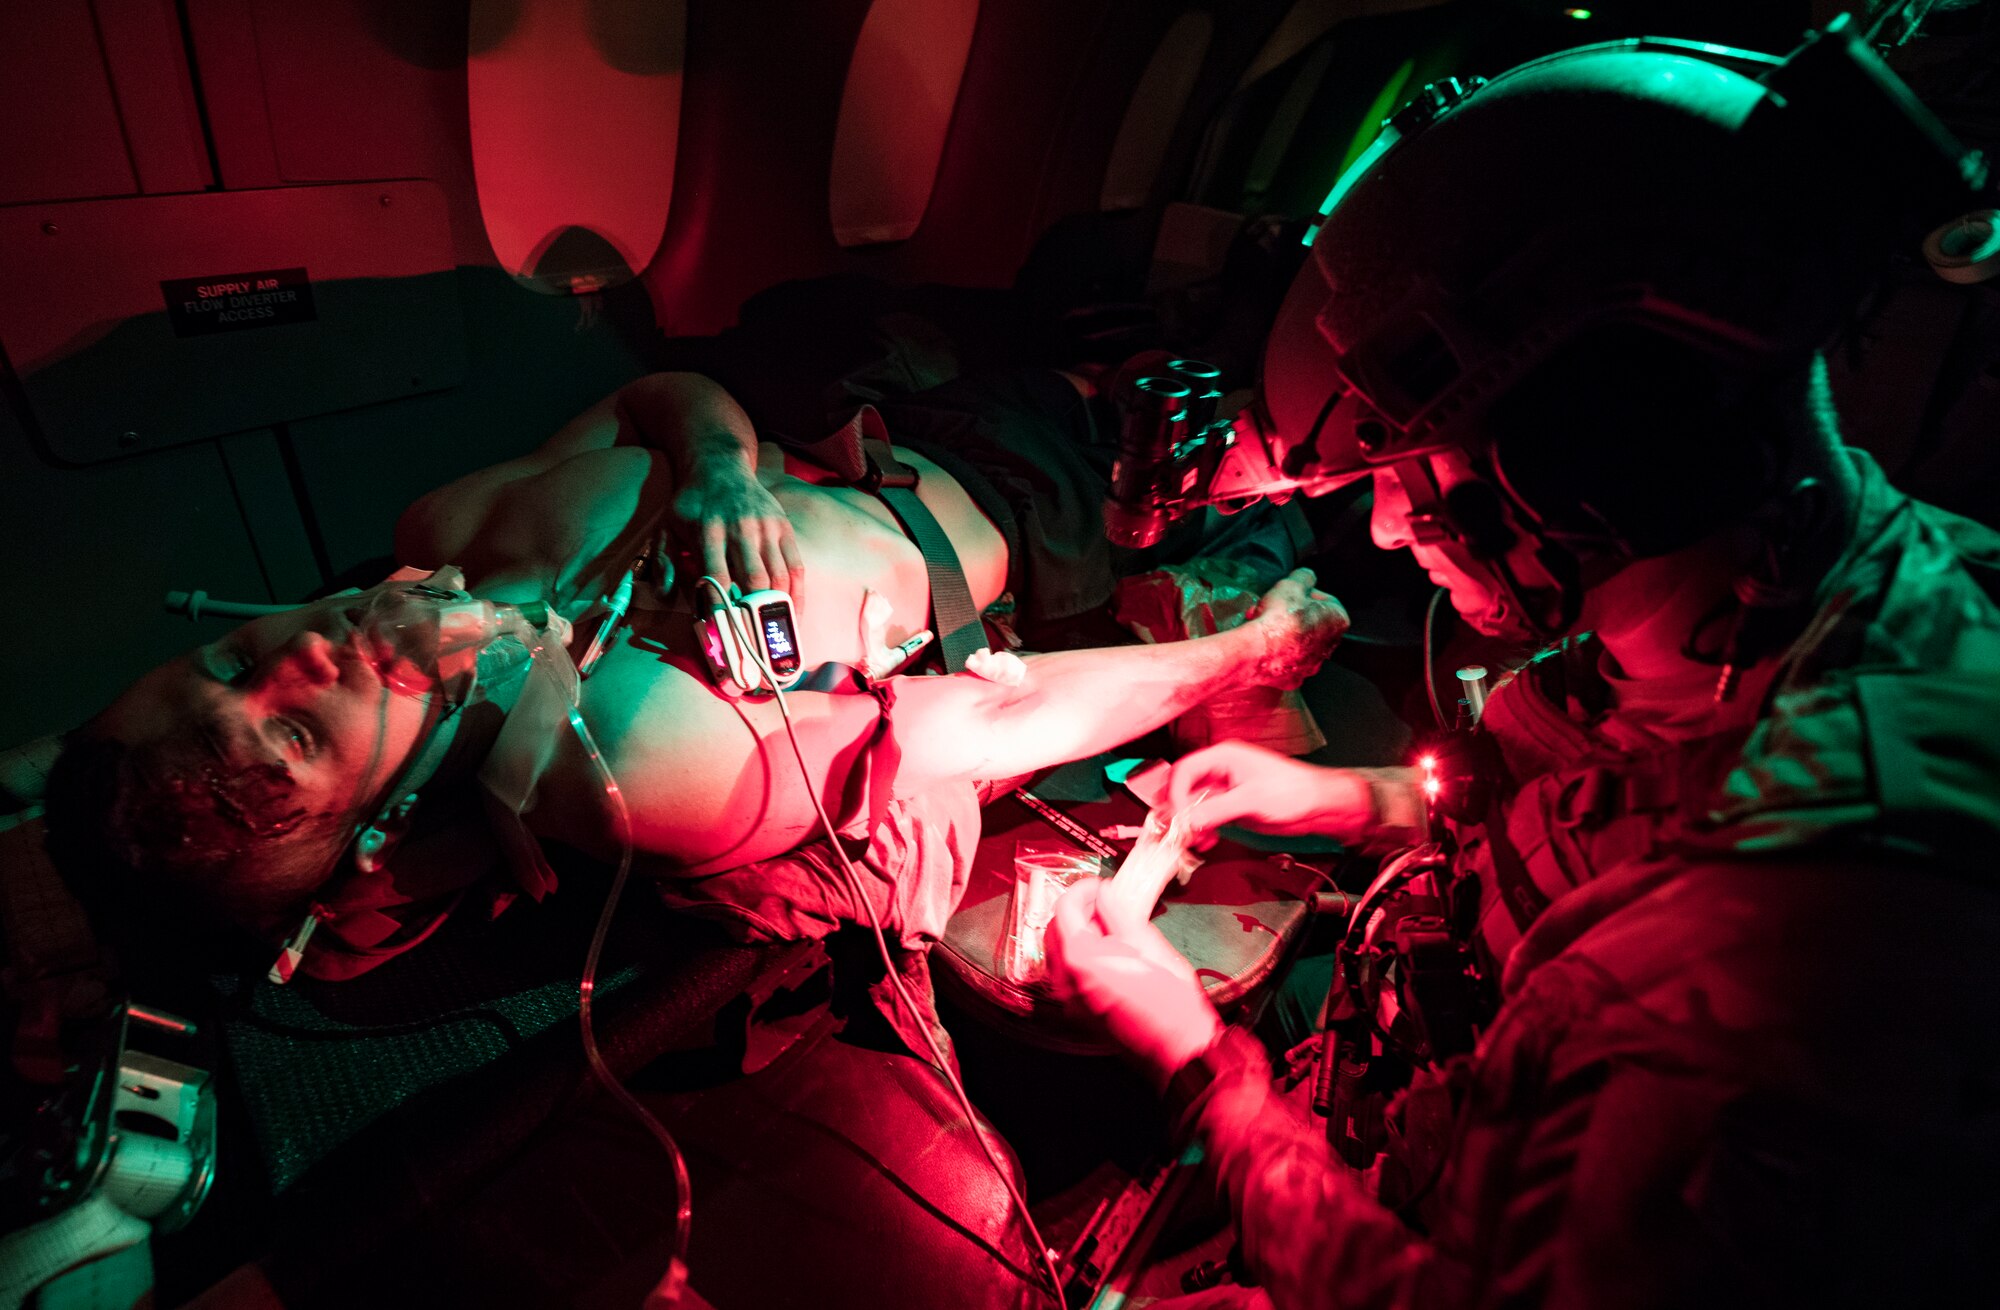 A U.S. Air Force special operations force medical element works with Royal Danish Air Force medical personnel to treat simulated patients